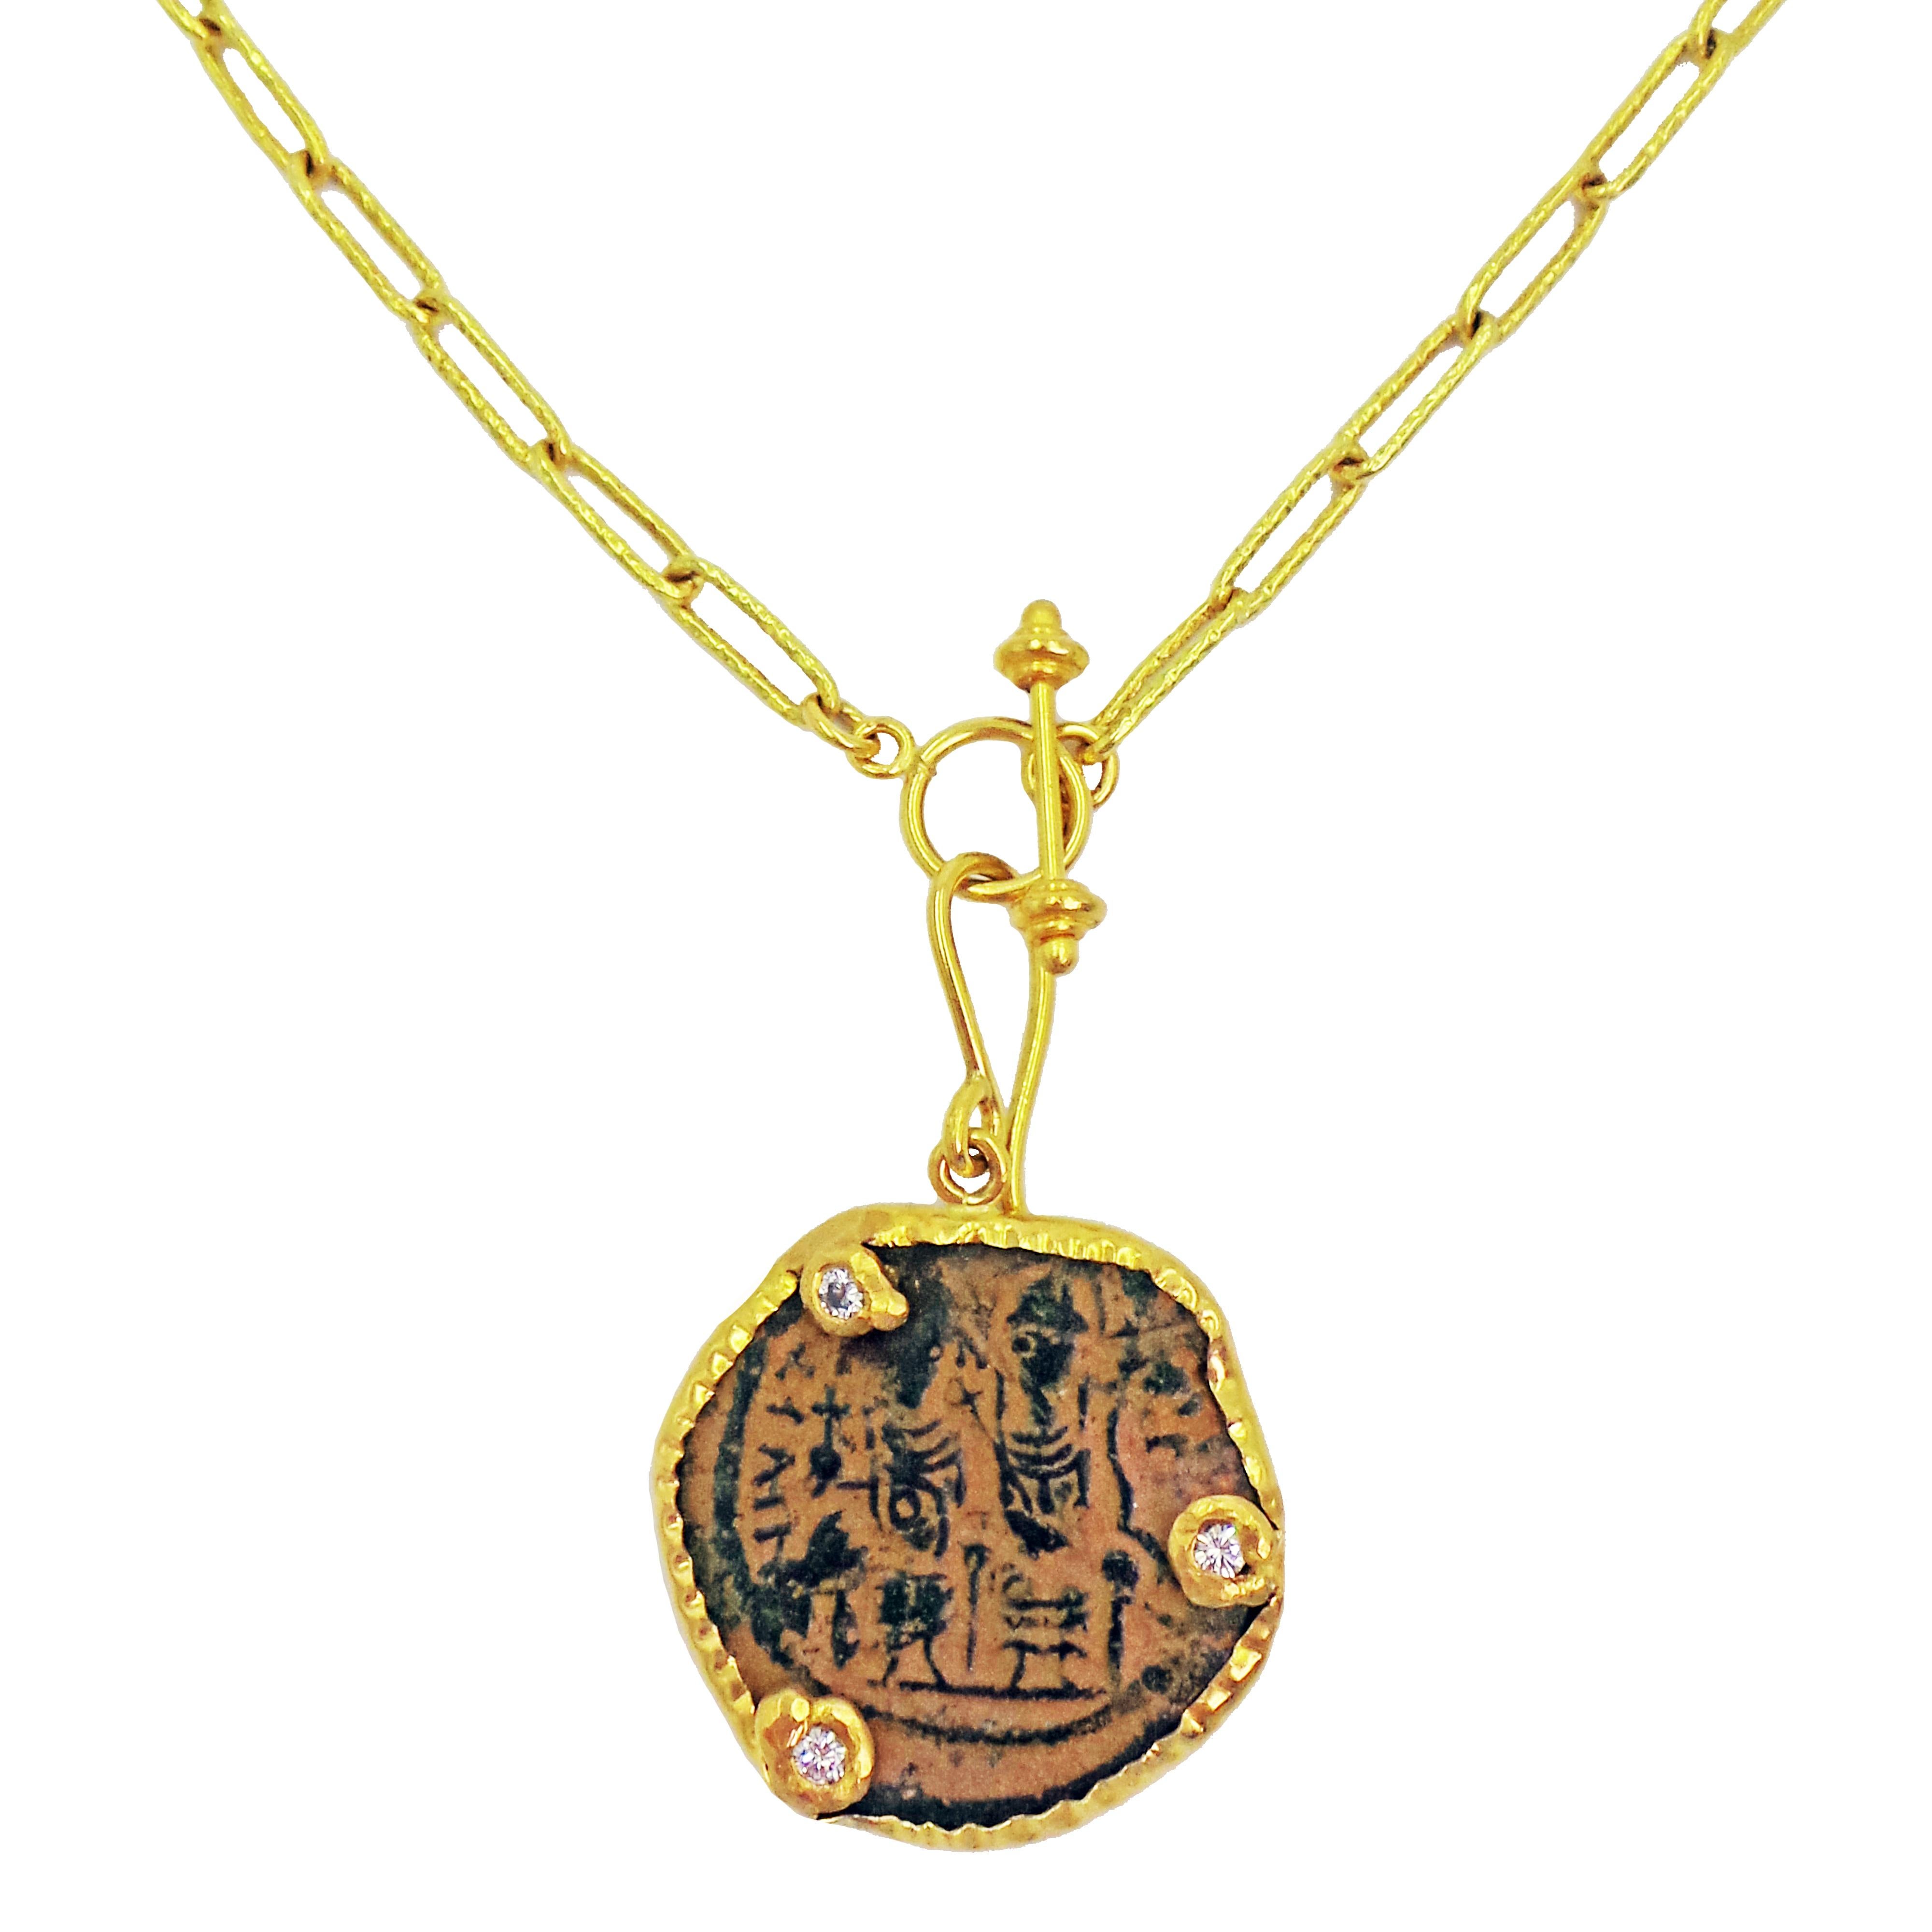 Authentic ancient Byzantine bronze coin (Justin II an Queen Sophia, 565 AD) and 3 diamonds (total weight 0.30 carat, SI1-SI2 clarity, G-H color) set in a 22k yellow gold pendant with hook bail. Pendant is on a solid, hammered 22k gold hand-made 24